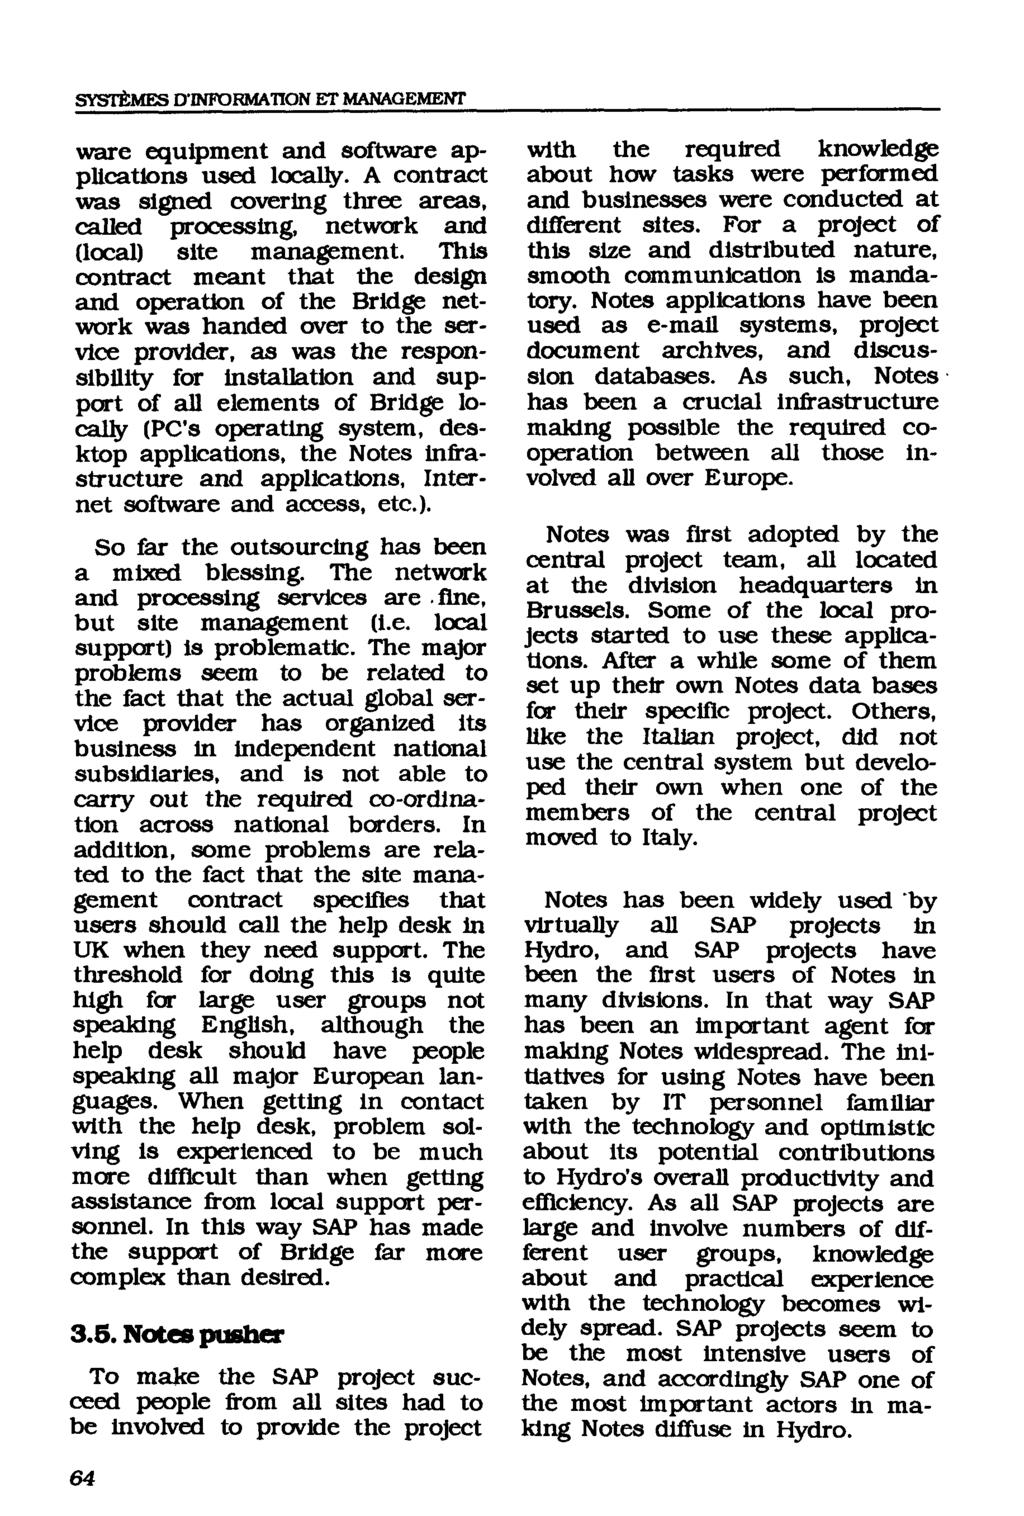 Systèmes d'information et Management, Vol. 4 [1999], Iss. 4, Art. 3 SYSTÈMES D'INFORMATION ET MANAGEMENT ware equipment and software applications used locally.